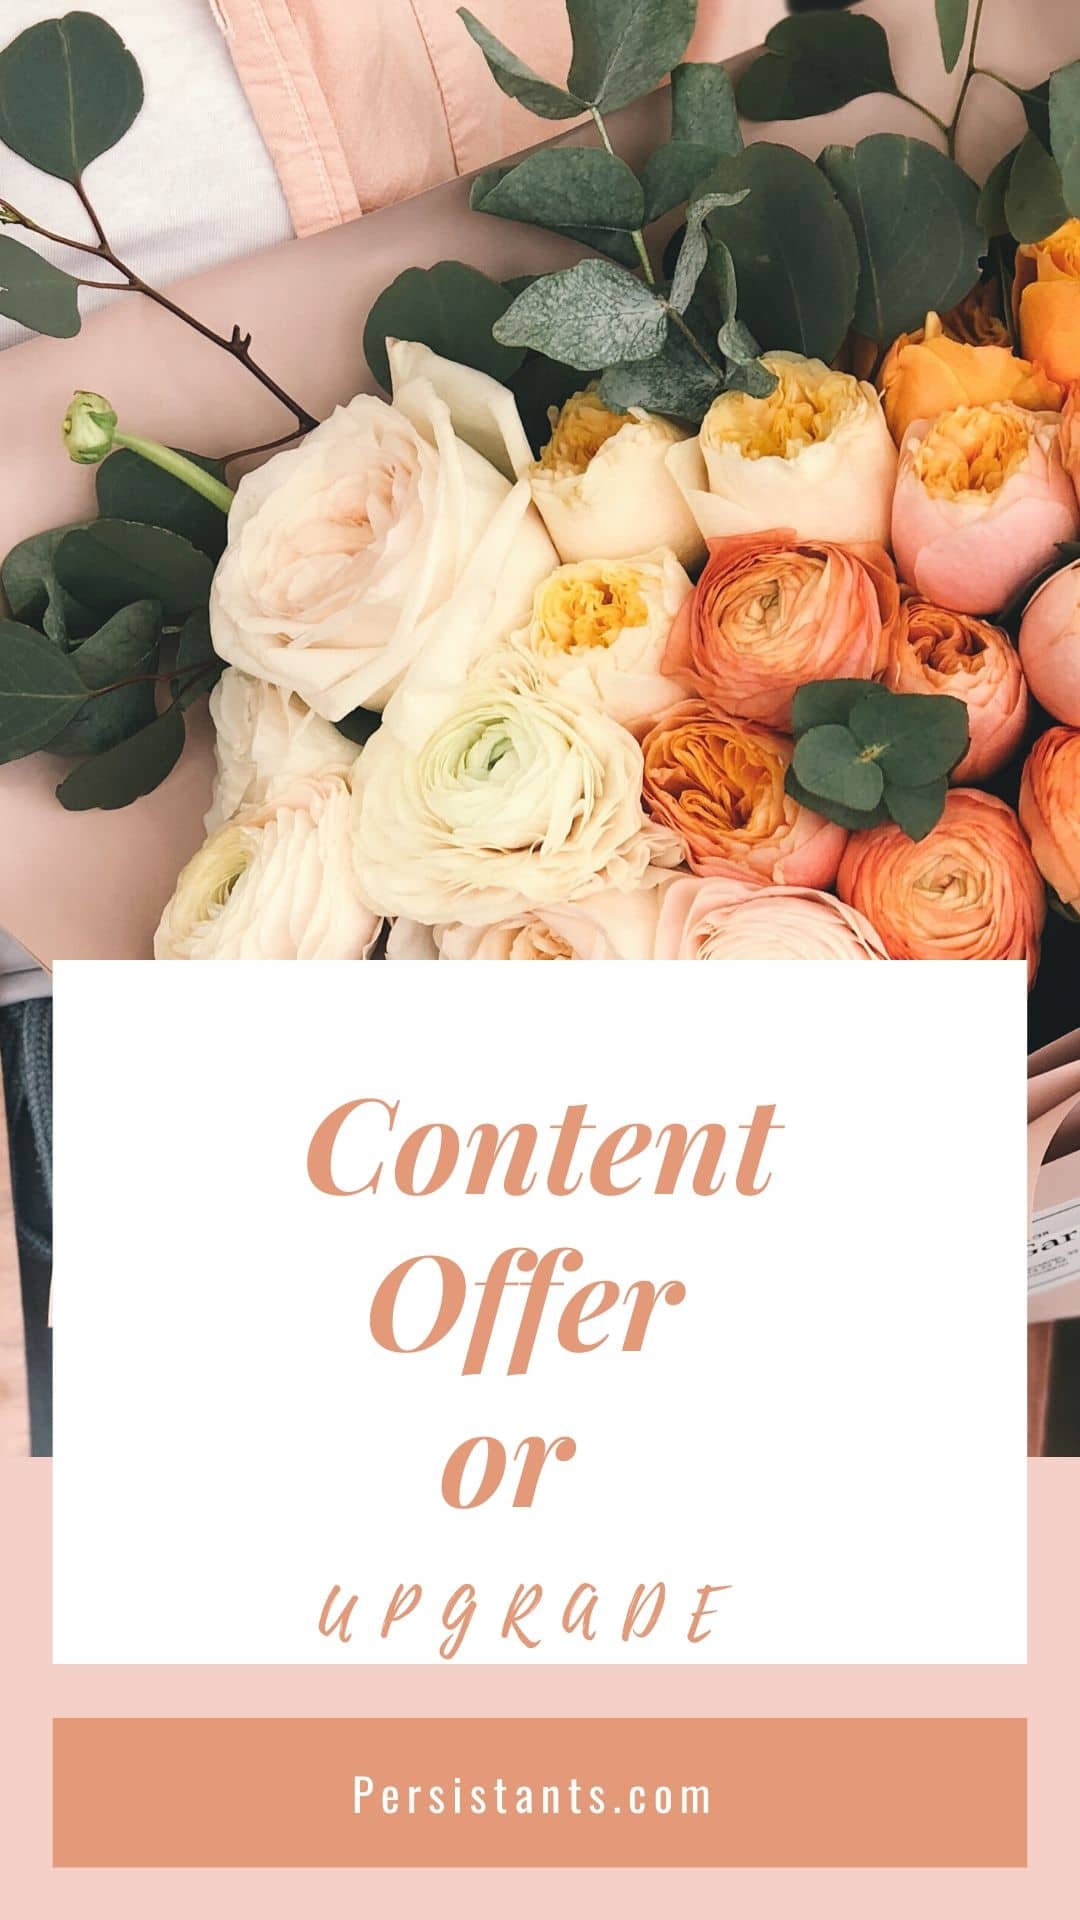 Content Offer or Content Shame